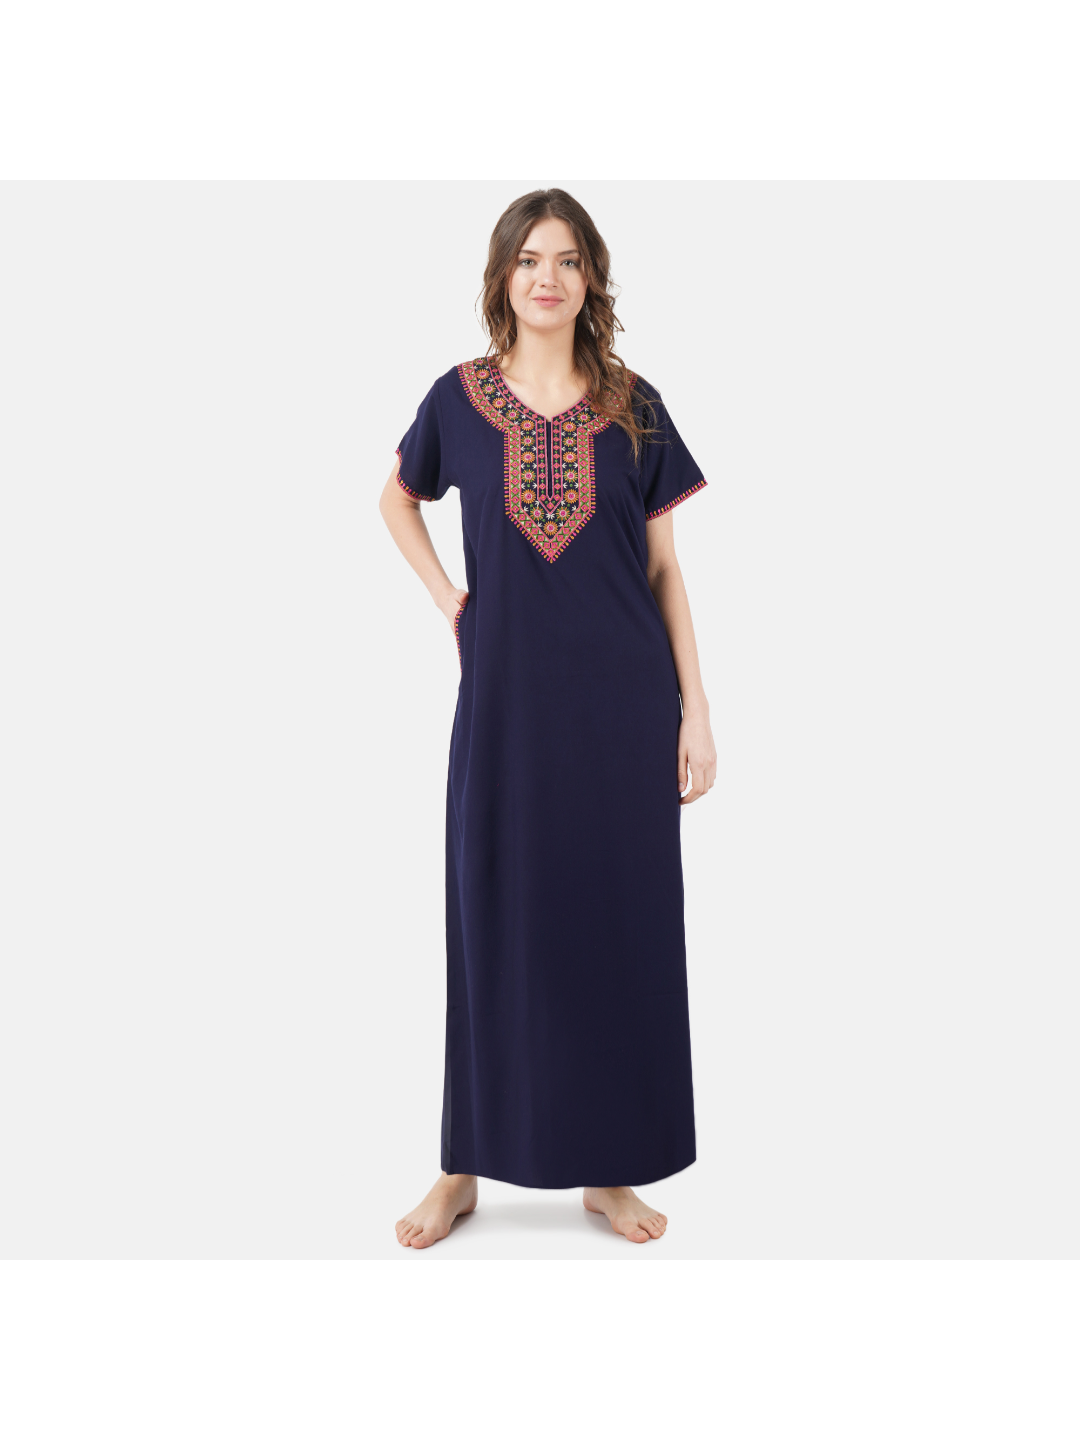 Navy Blue Embroidery XXL Soft Nighty. Soft Breathable Fabric